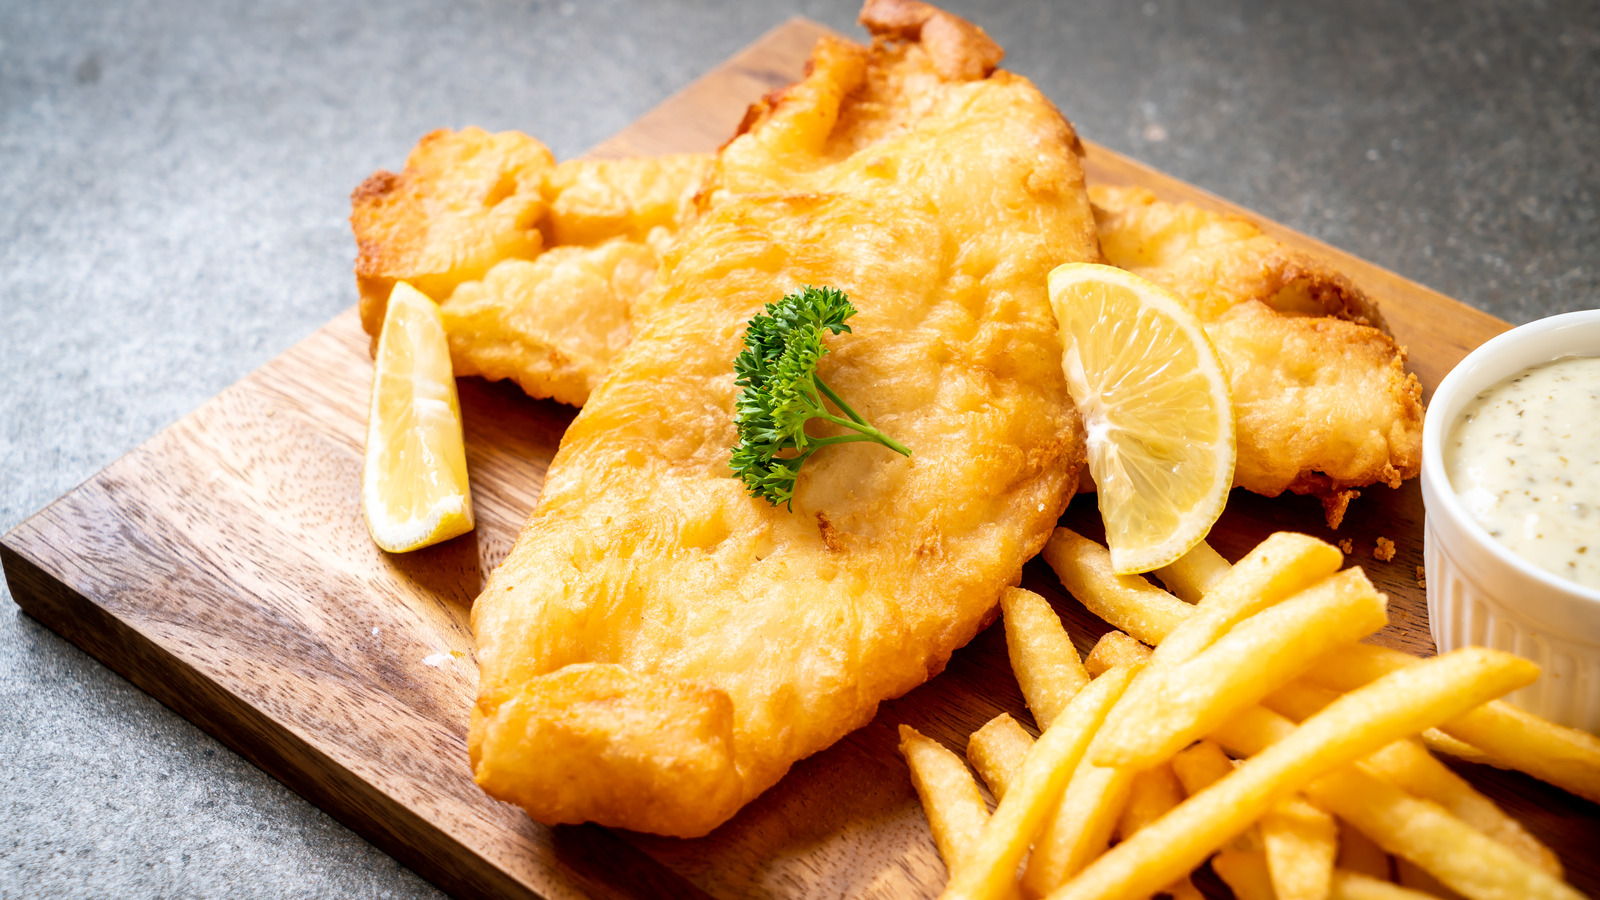 Where to Eat Fish and Chips in Chicago